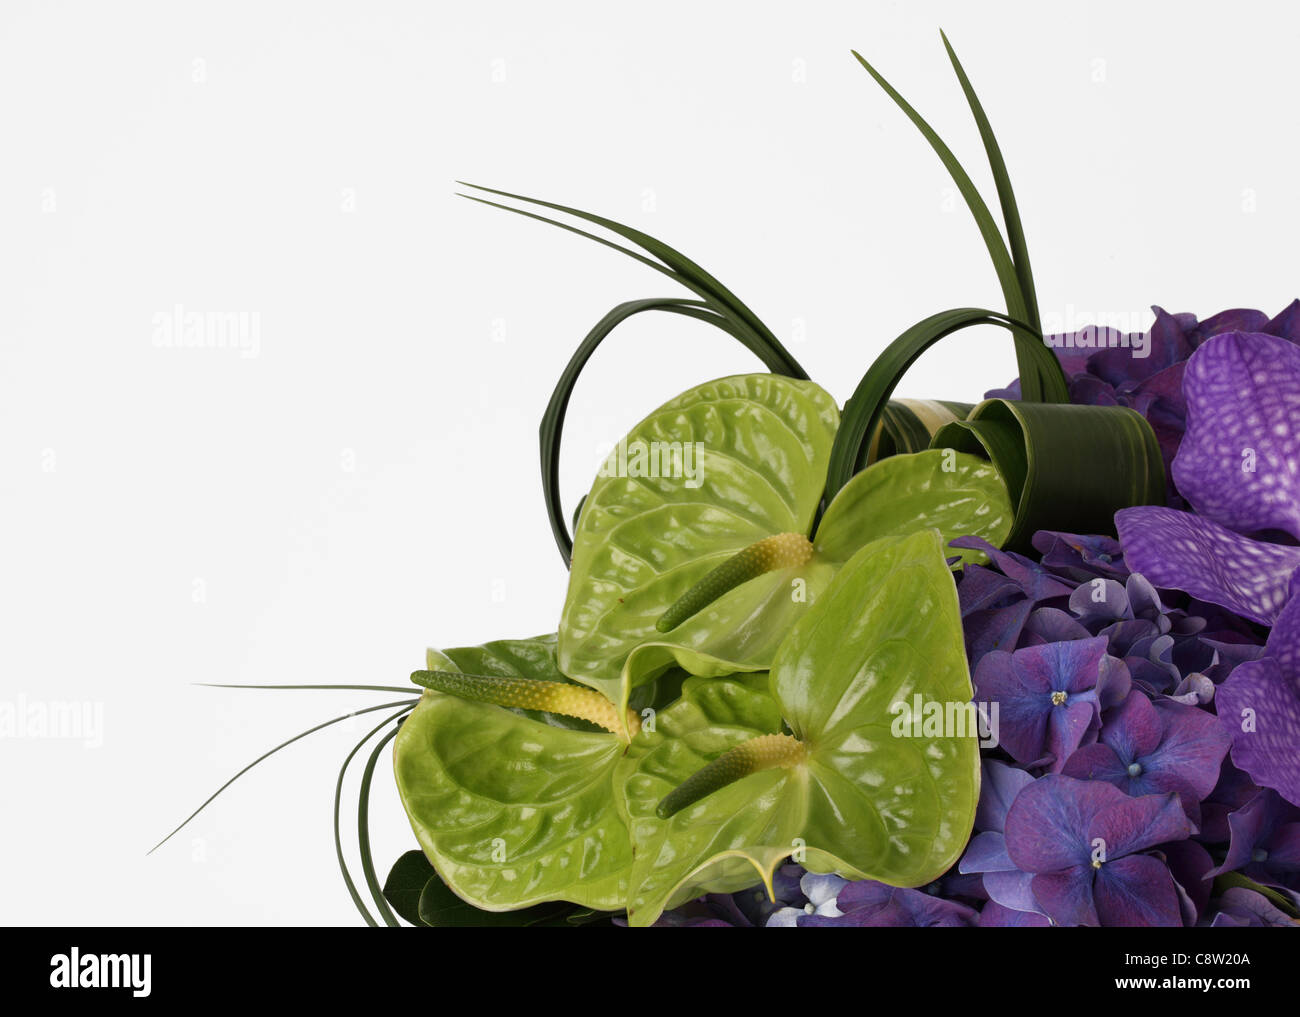 A close-up of a colorful bouquet of flowers. Purple vanda orchids, green anthuriums, purple hydrangea. Stock Photo